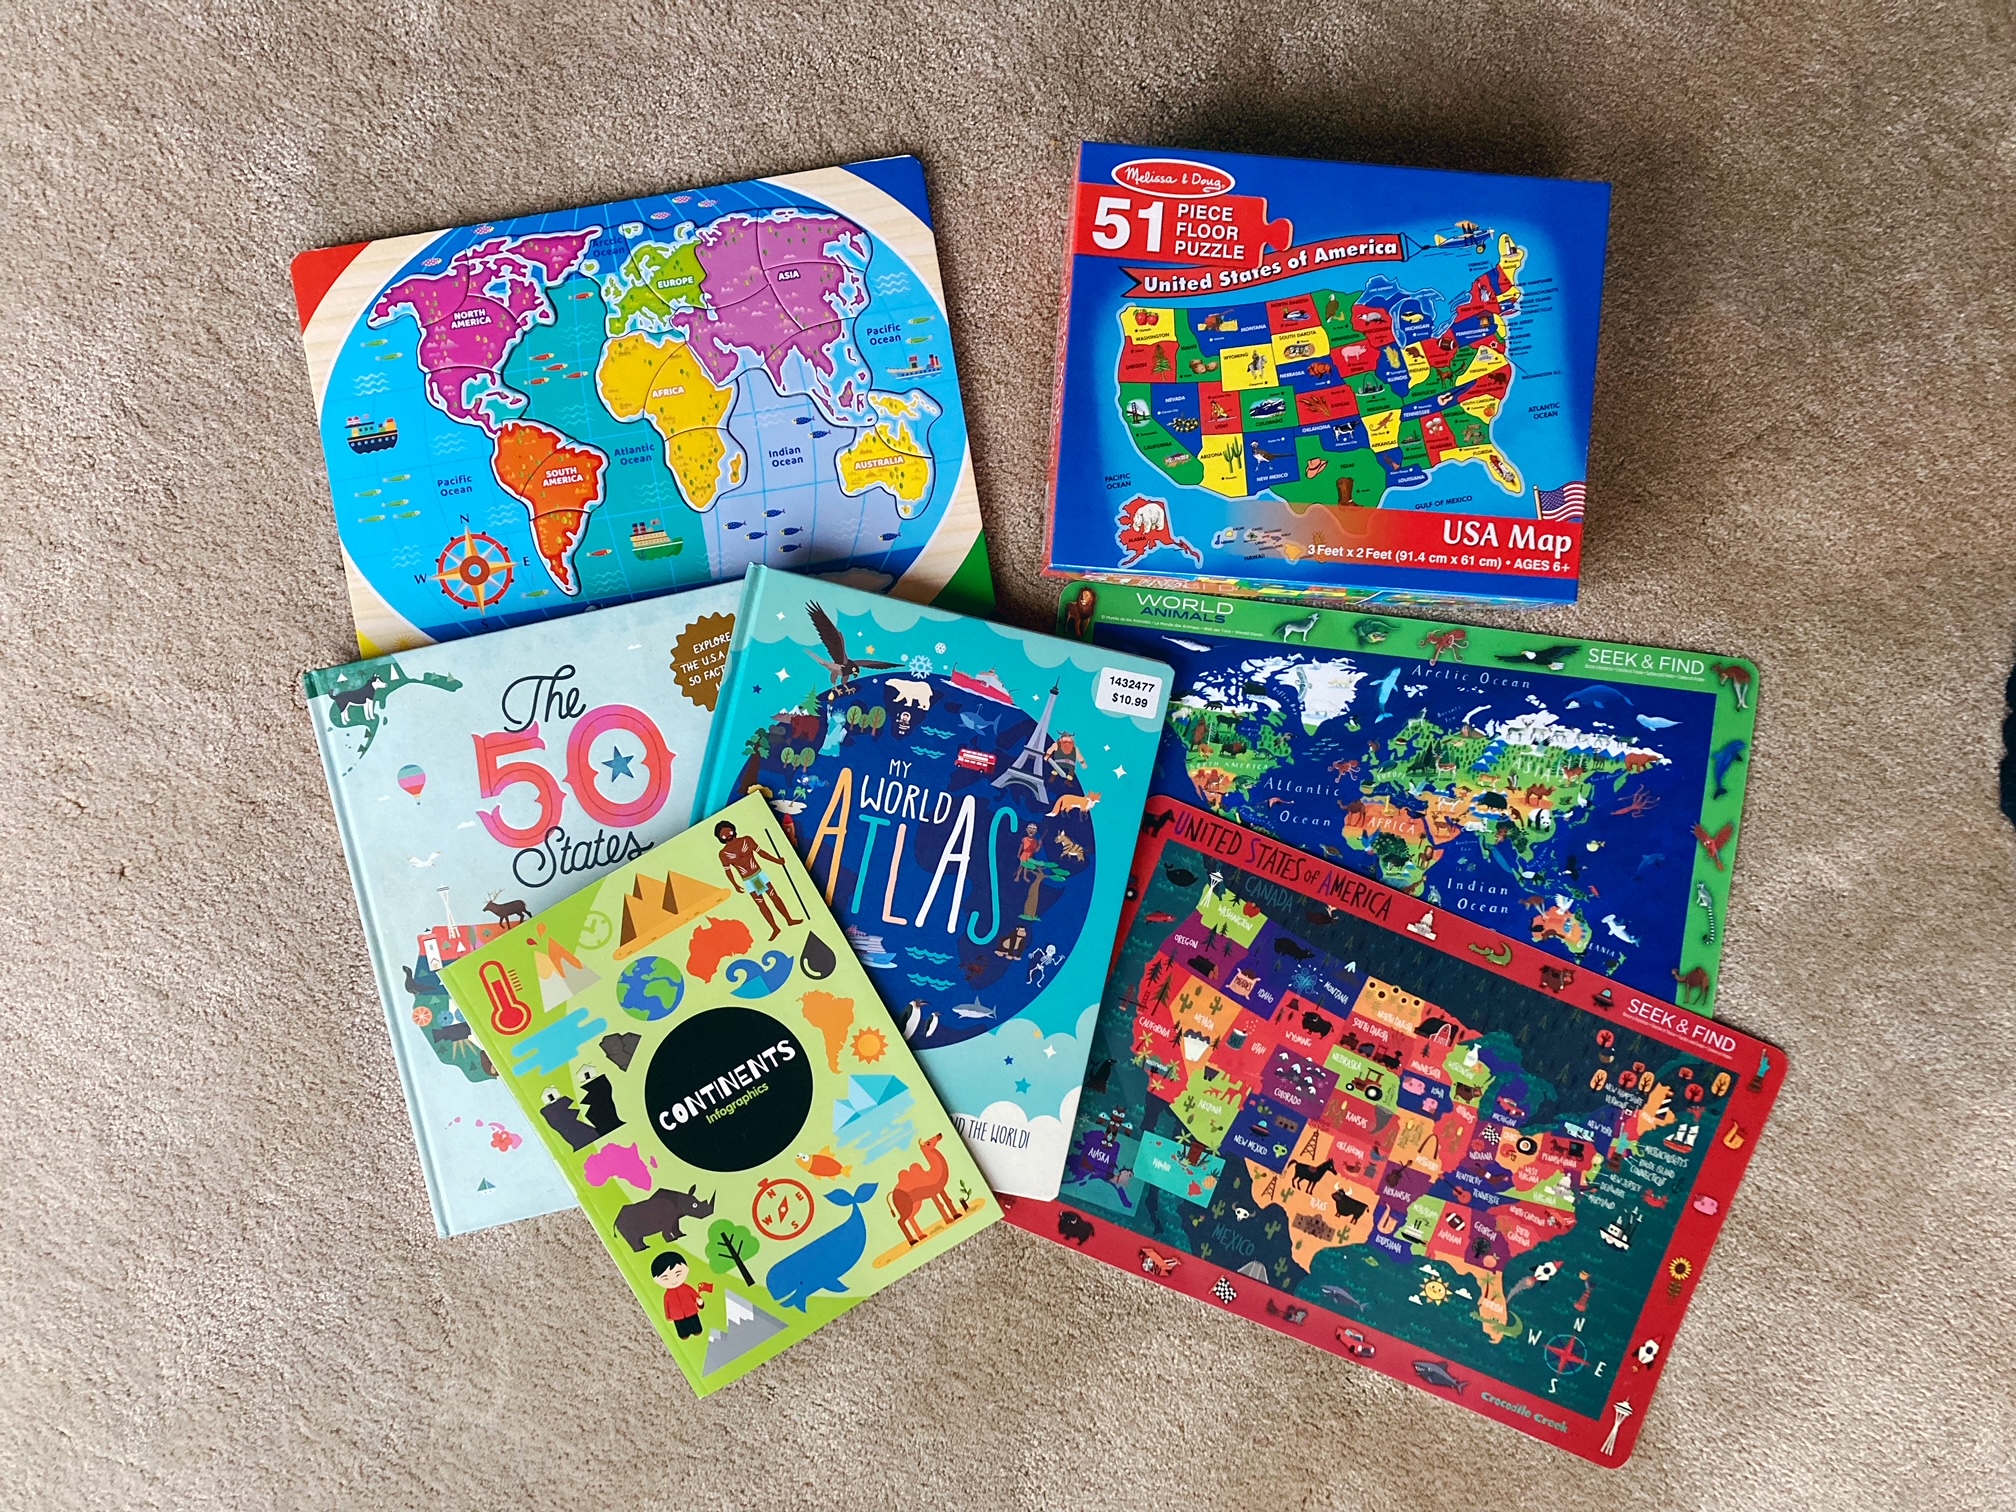 Gentle Geography Resources for Early Elementary